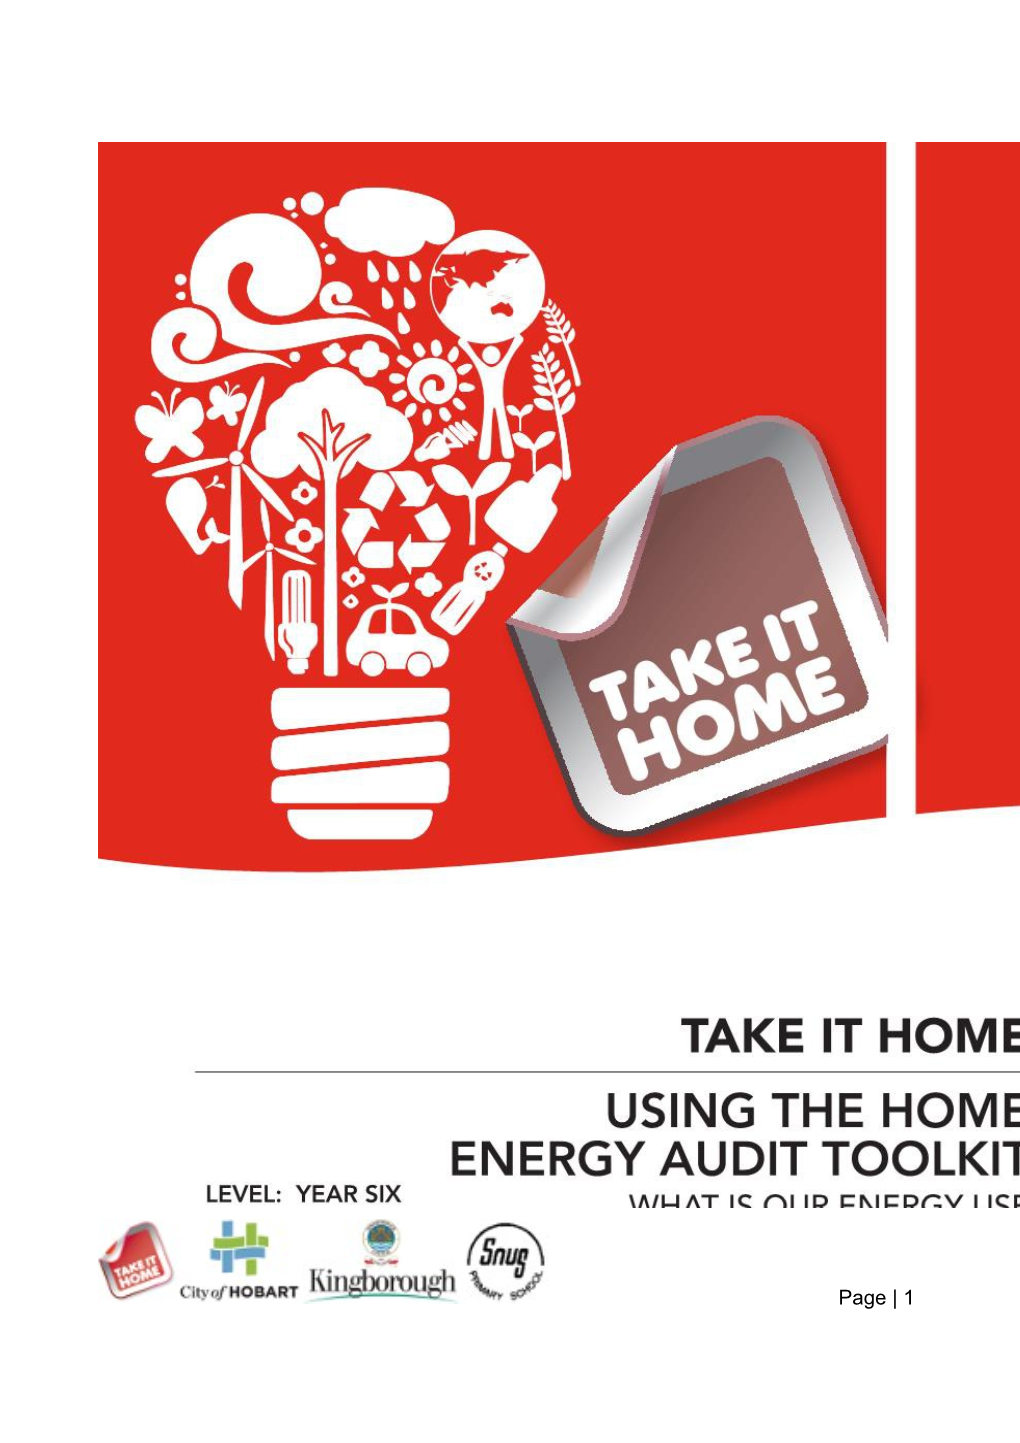 Using the Home Energy Audit Toolkit